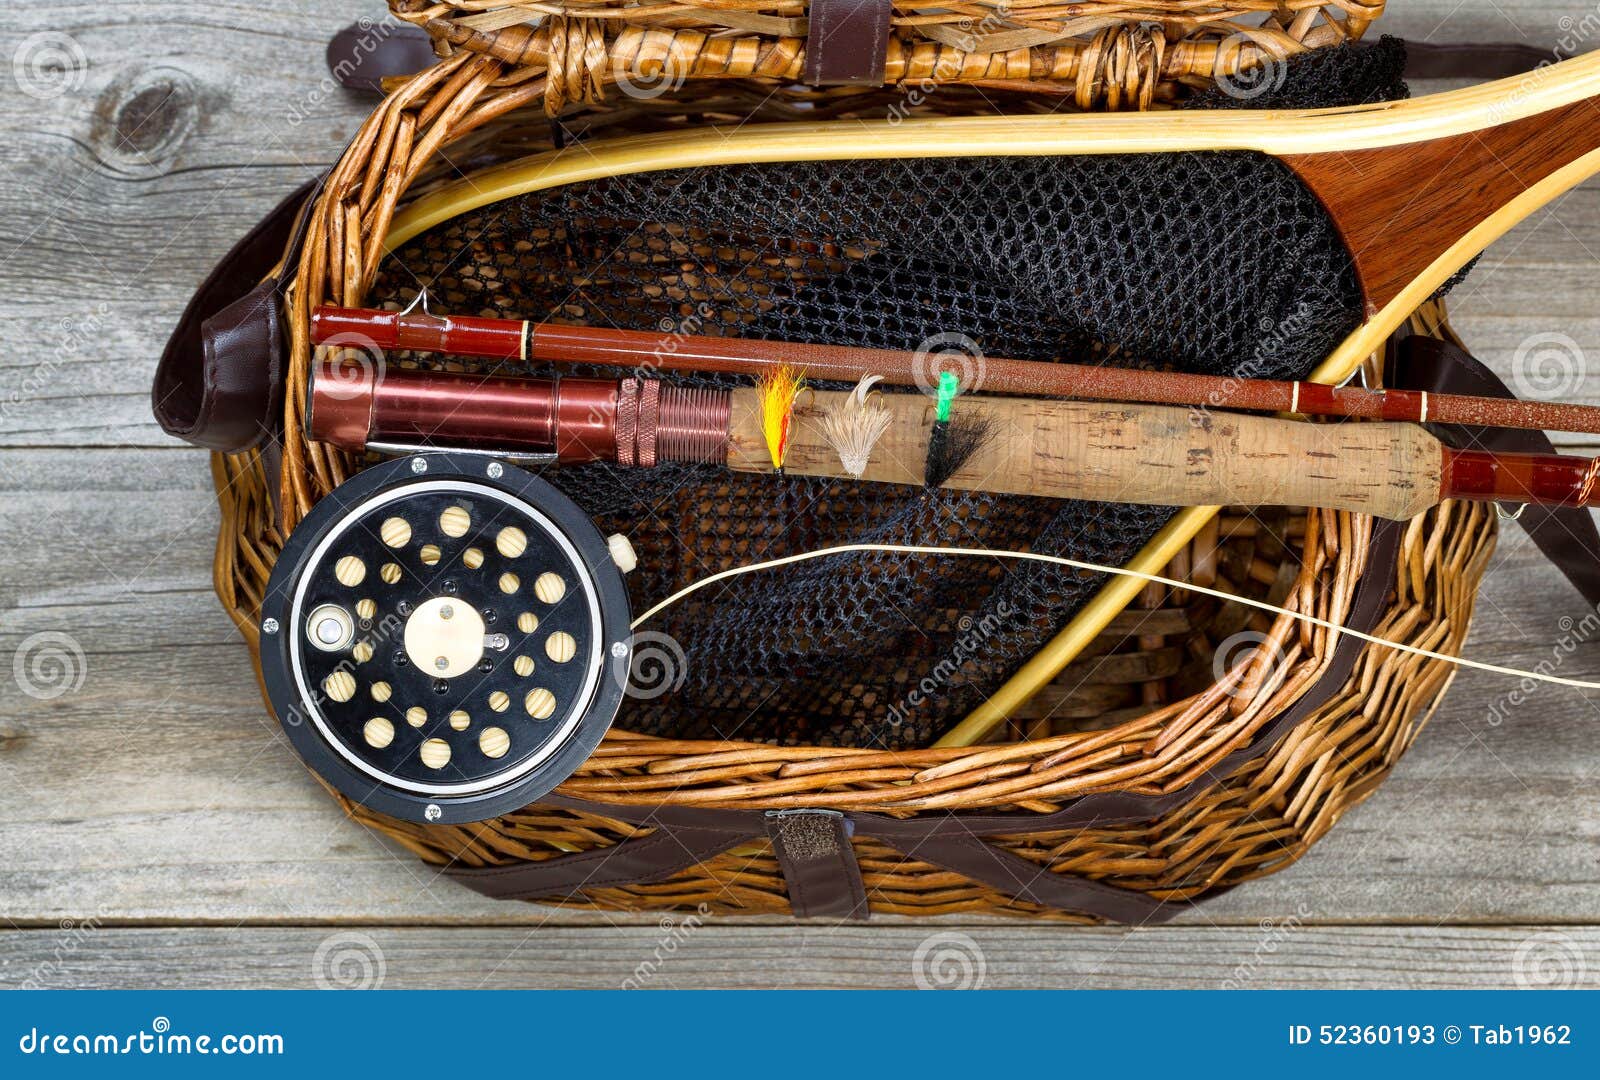 Creel Filled with Trout Fishing Equipment Stock Image - Image of